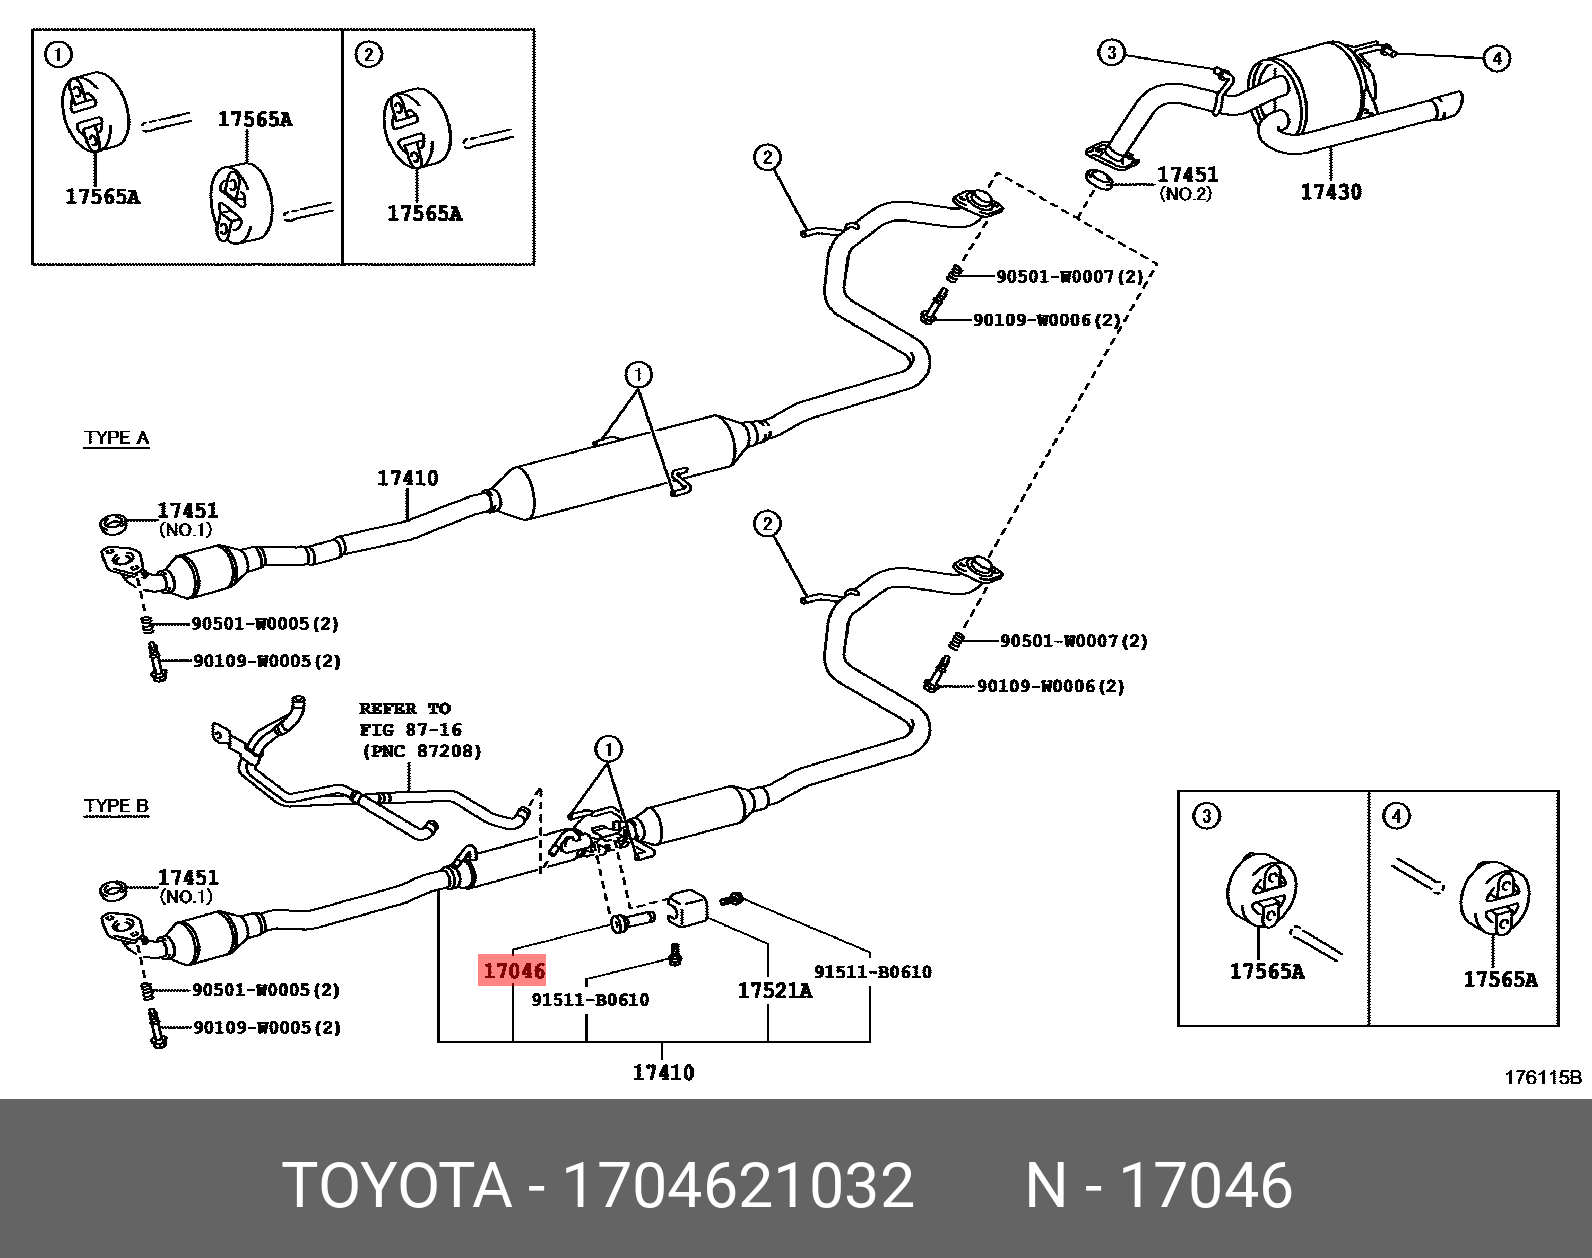 AURIS 201208 - , ACTUATOR SUB-ASSY, EXHAUST PIPE GAS CONTROL